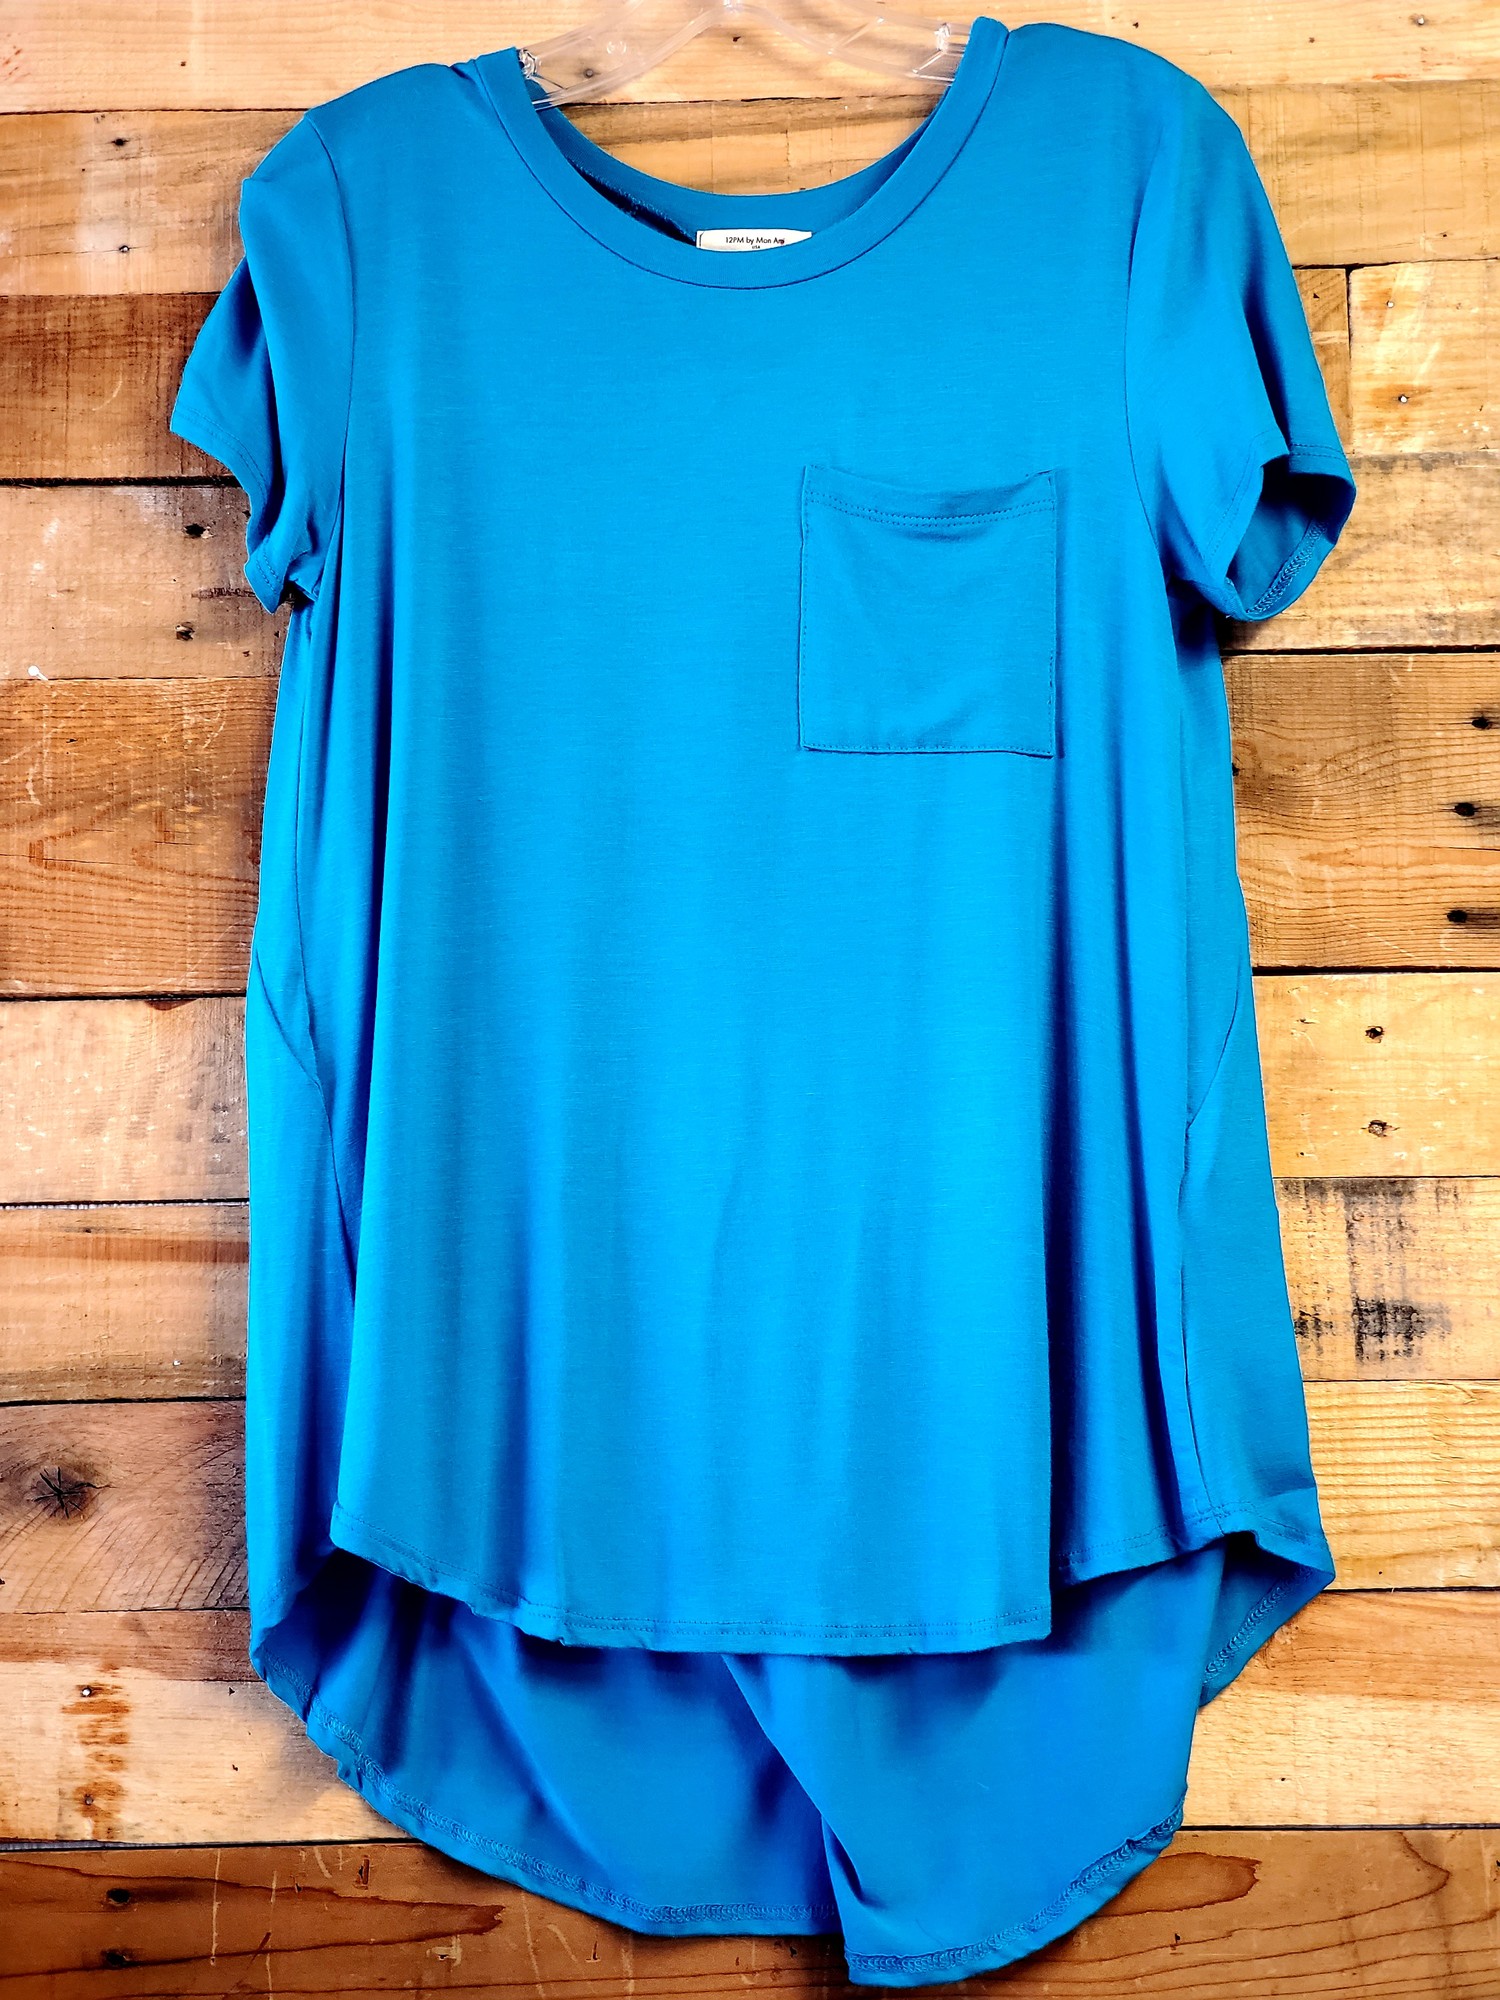 12PM BY MON AMI
Short-sleeve, solid rayon spandex top with a round neck, front pocket, pleated bac and rounded hem Turqoise
Made in USA